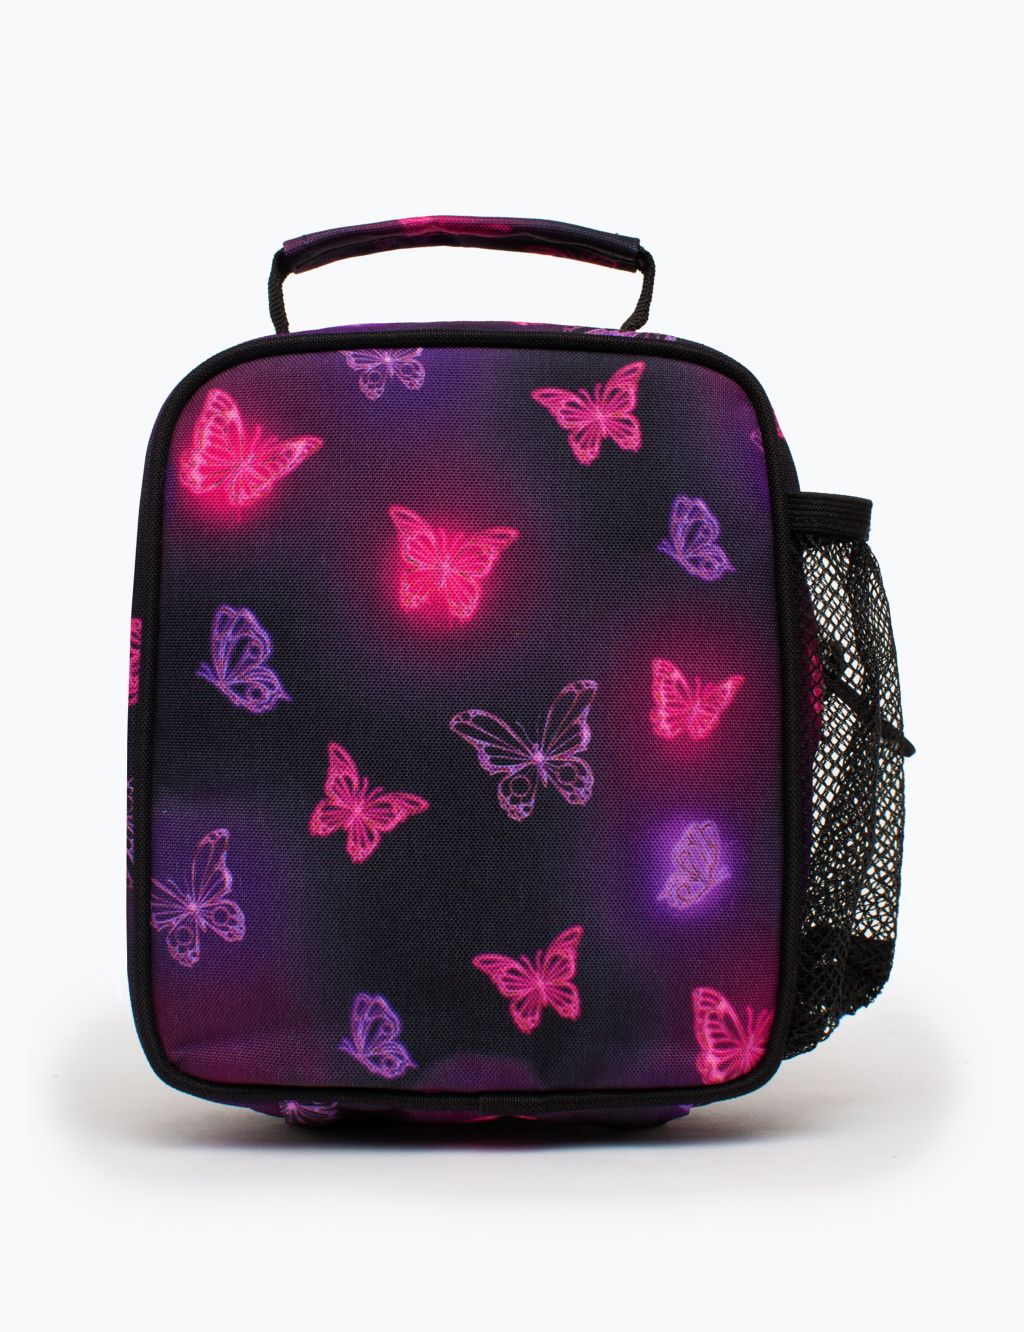 Kids' Butterfly Print Lunch Box image 3